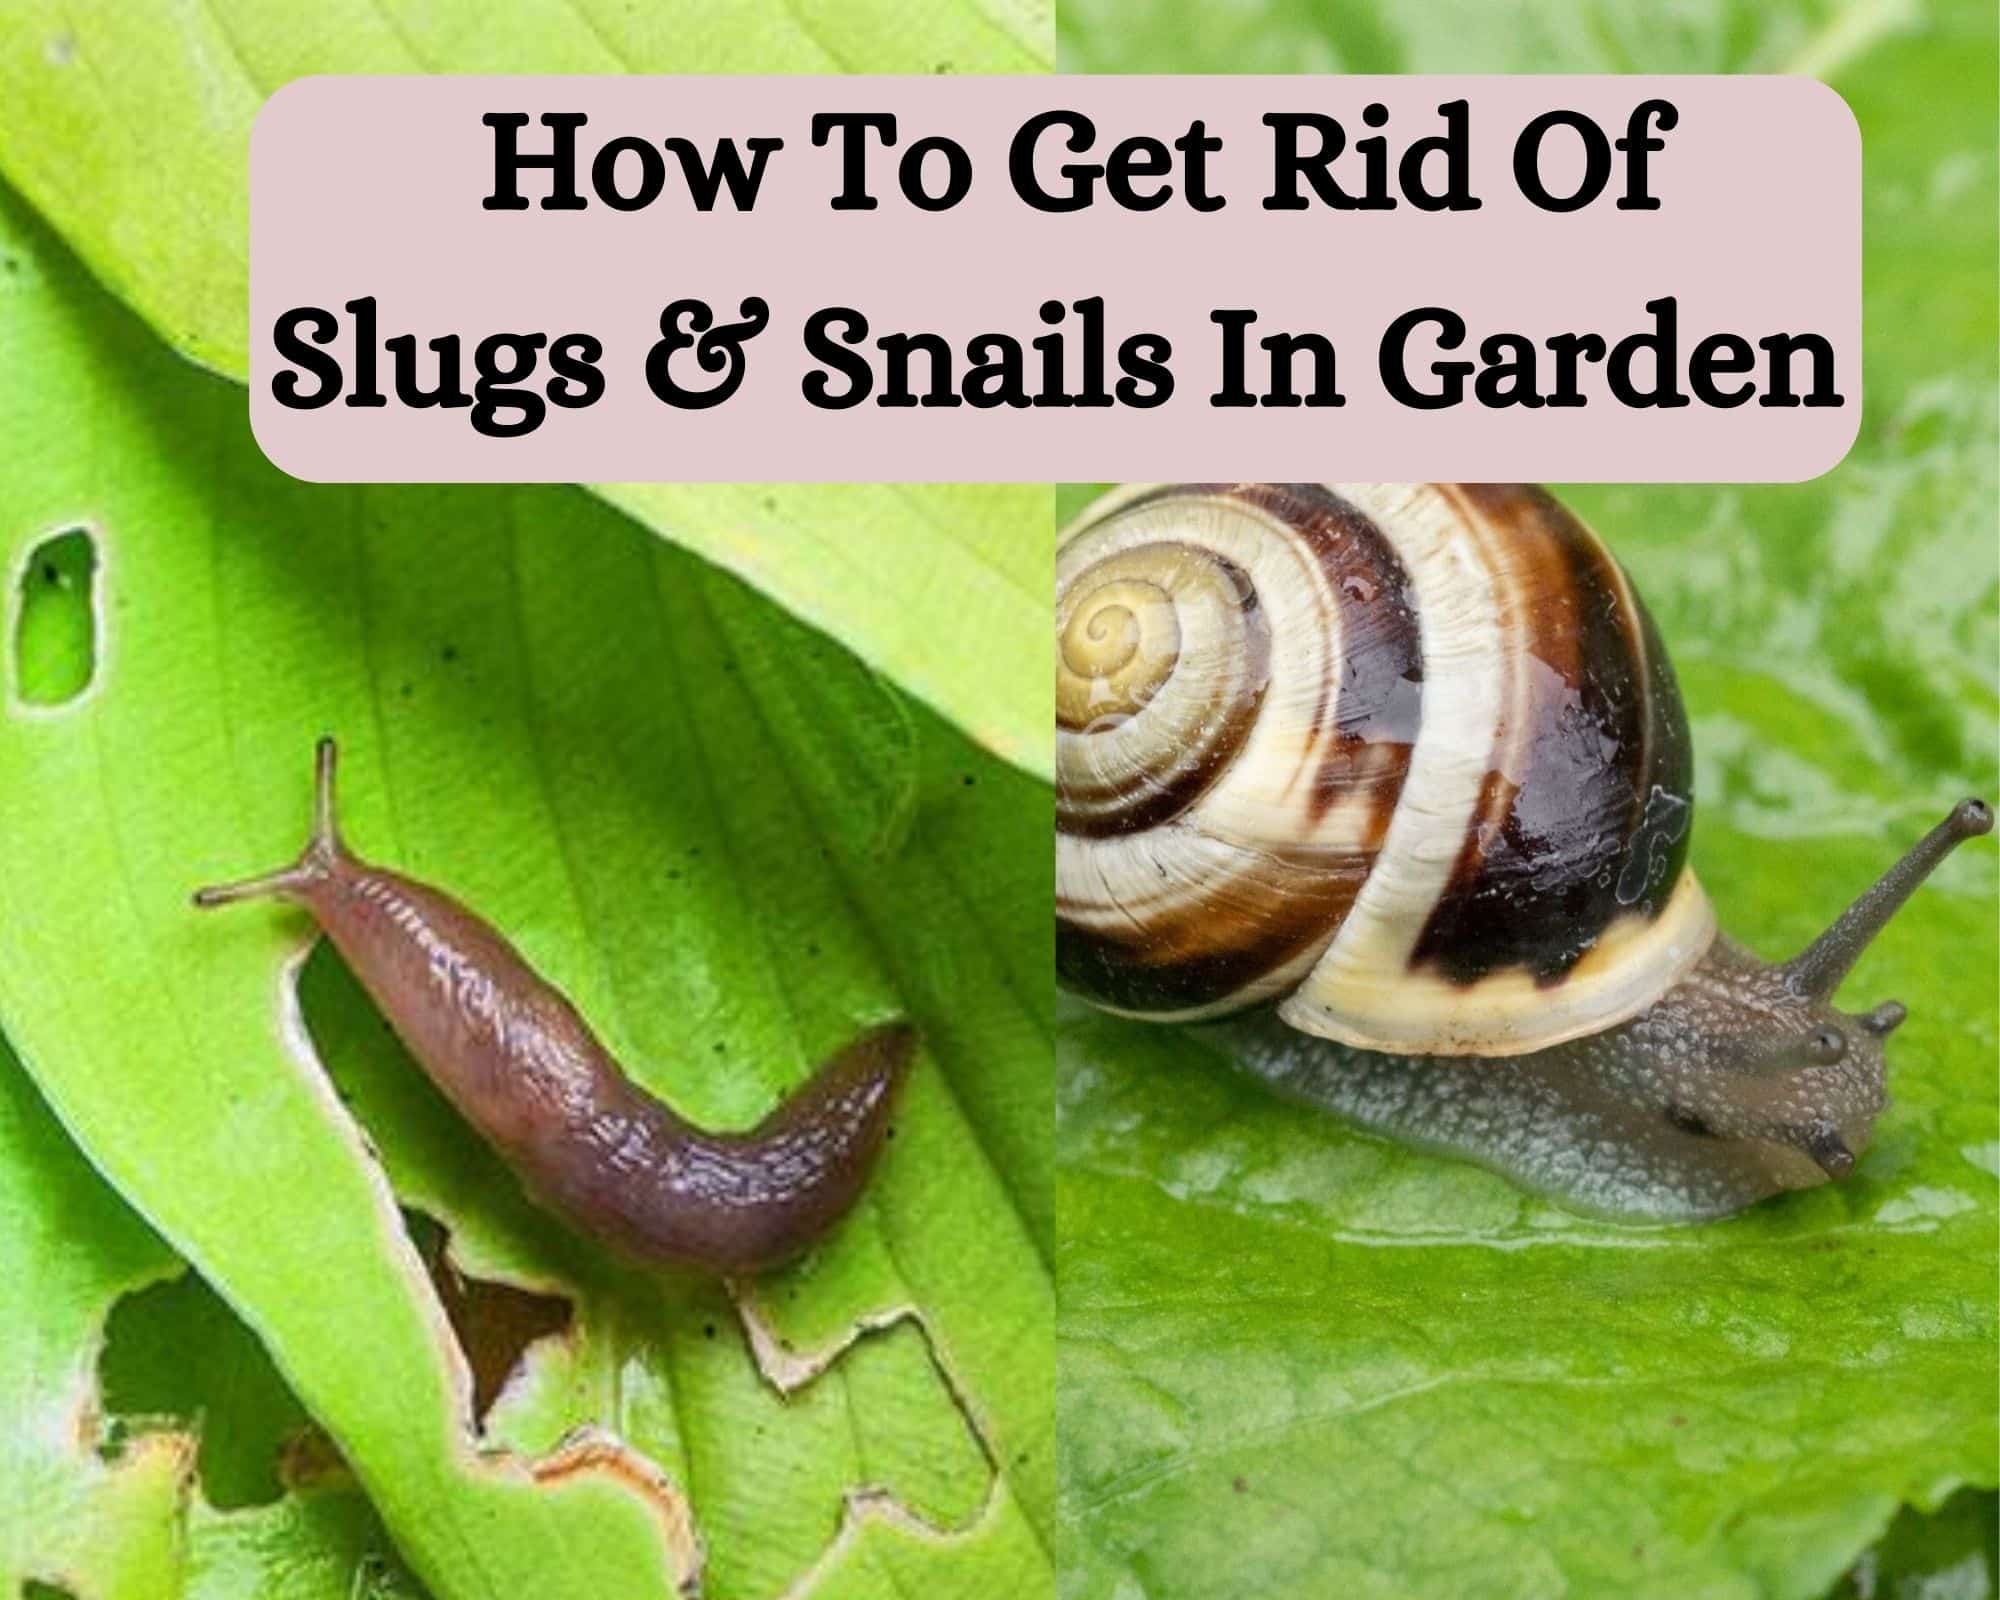 How To Get Rid Of Slugs And Snails In Garden